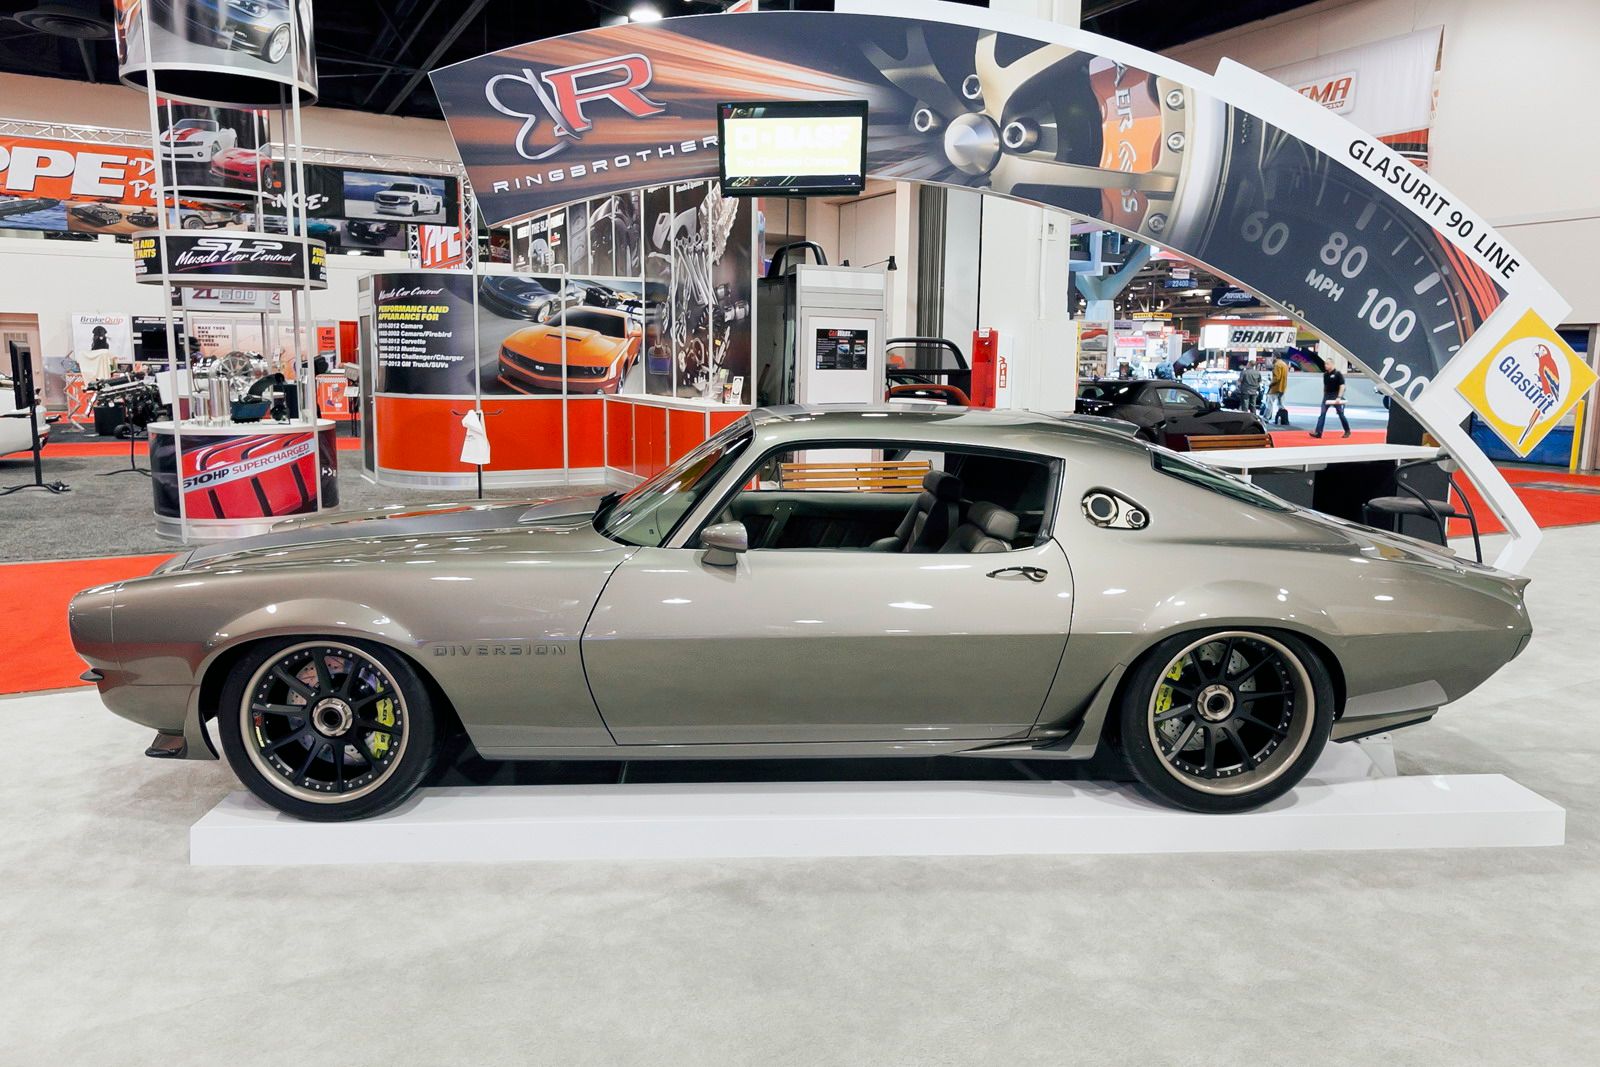 1970 Chevrolet Camaro Diversion by Ring Brothers